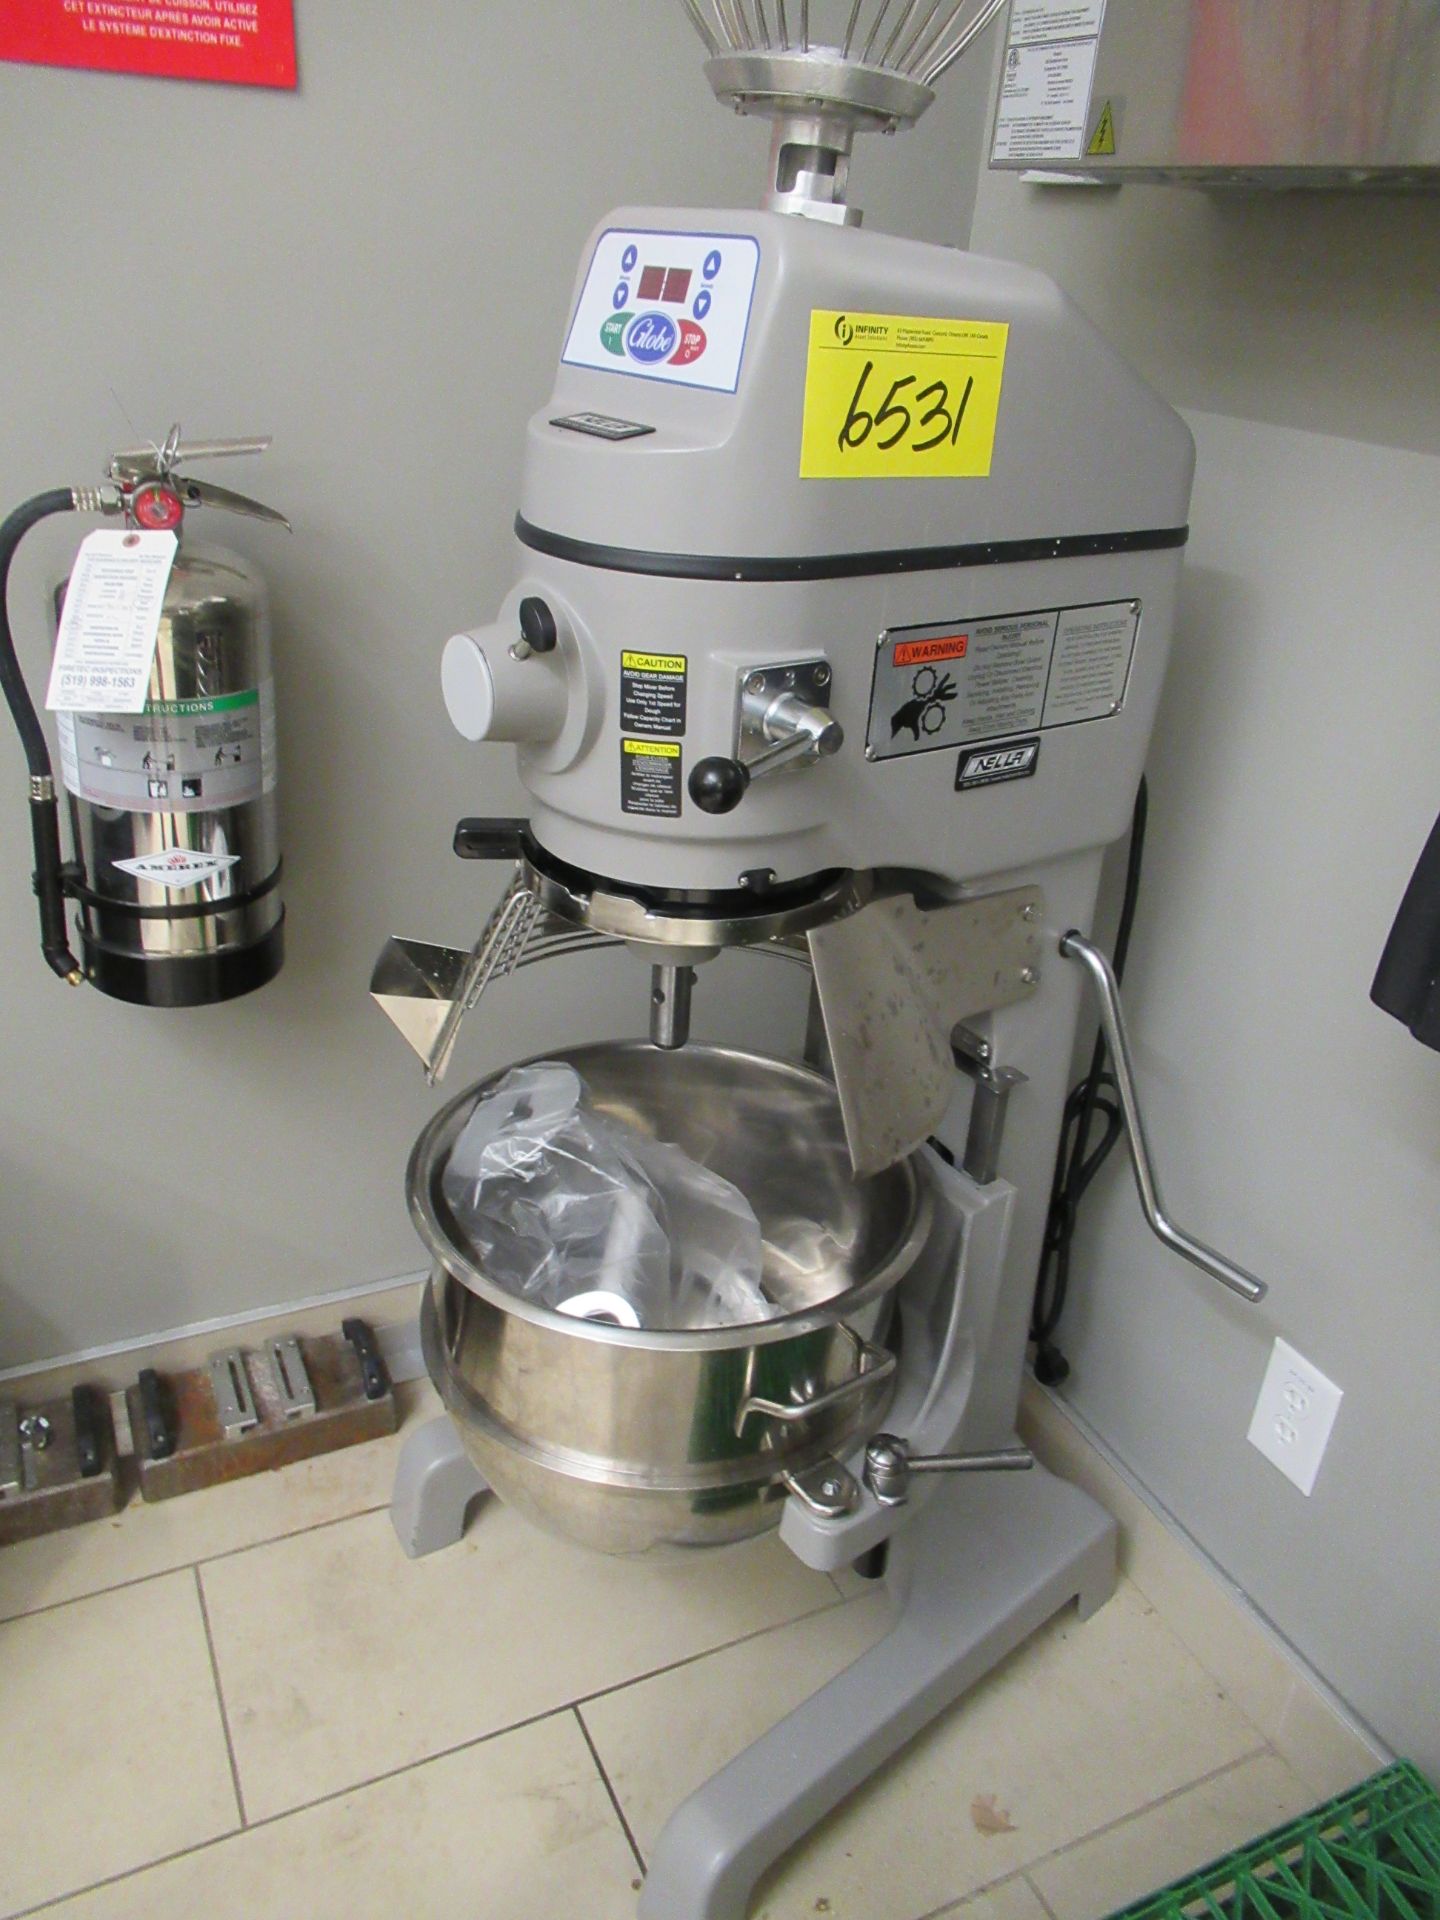 LOT OF GLOBE SP3O STAND MIXER (REUTER) - Image 2 of 5